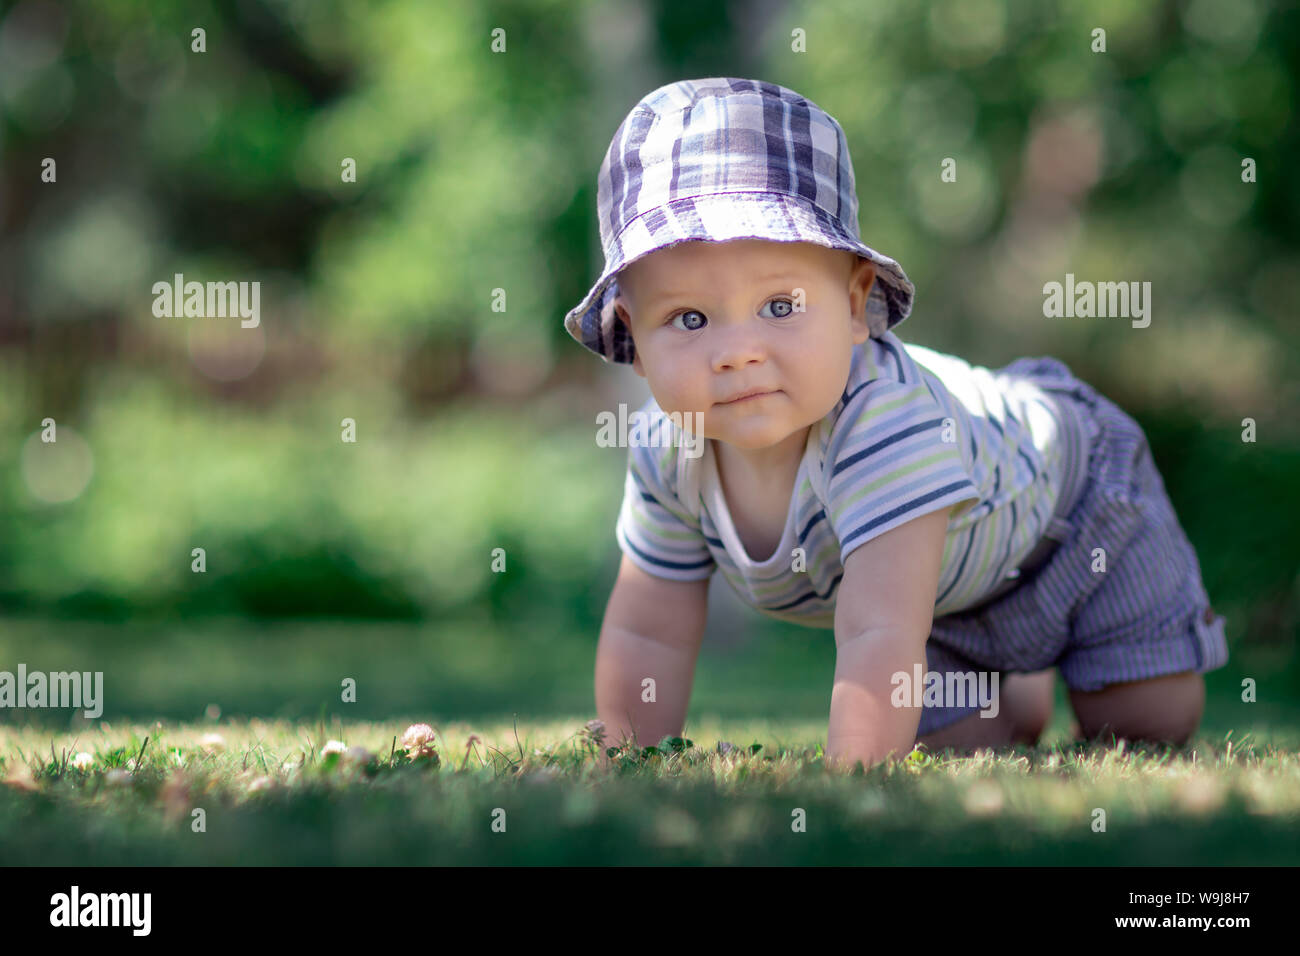 Baby with nice blue cap crawling on the green grass in the garden and smiles Stock Photo